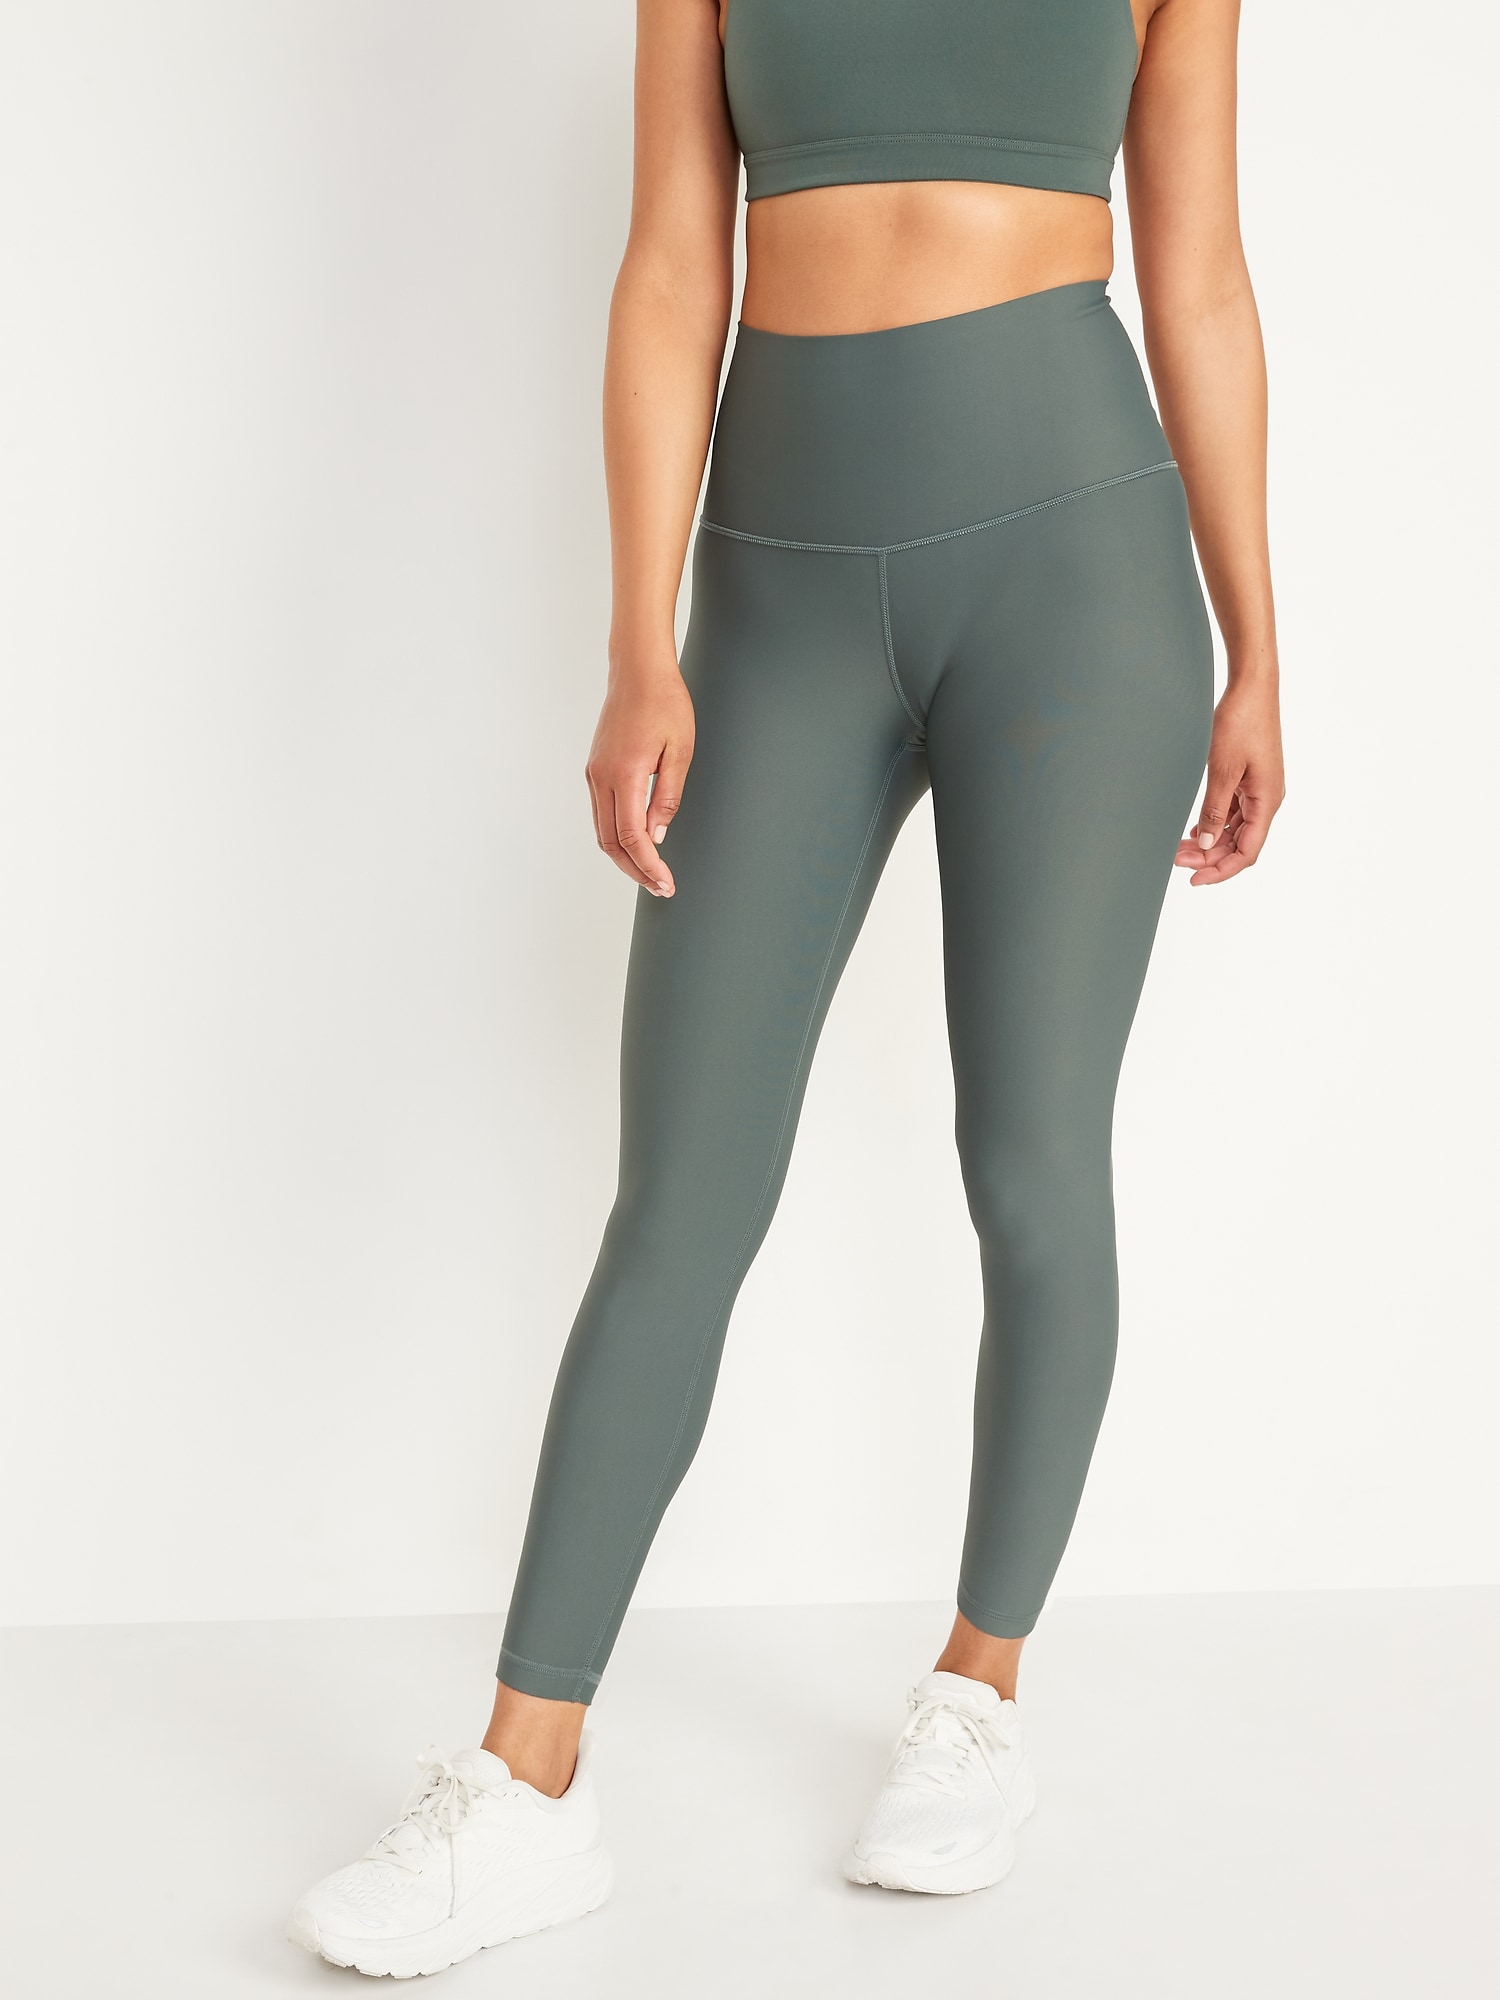 Old Navy: Girl's and Women's Powersoft Leggings as low as $10